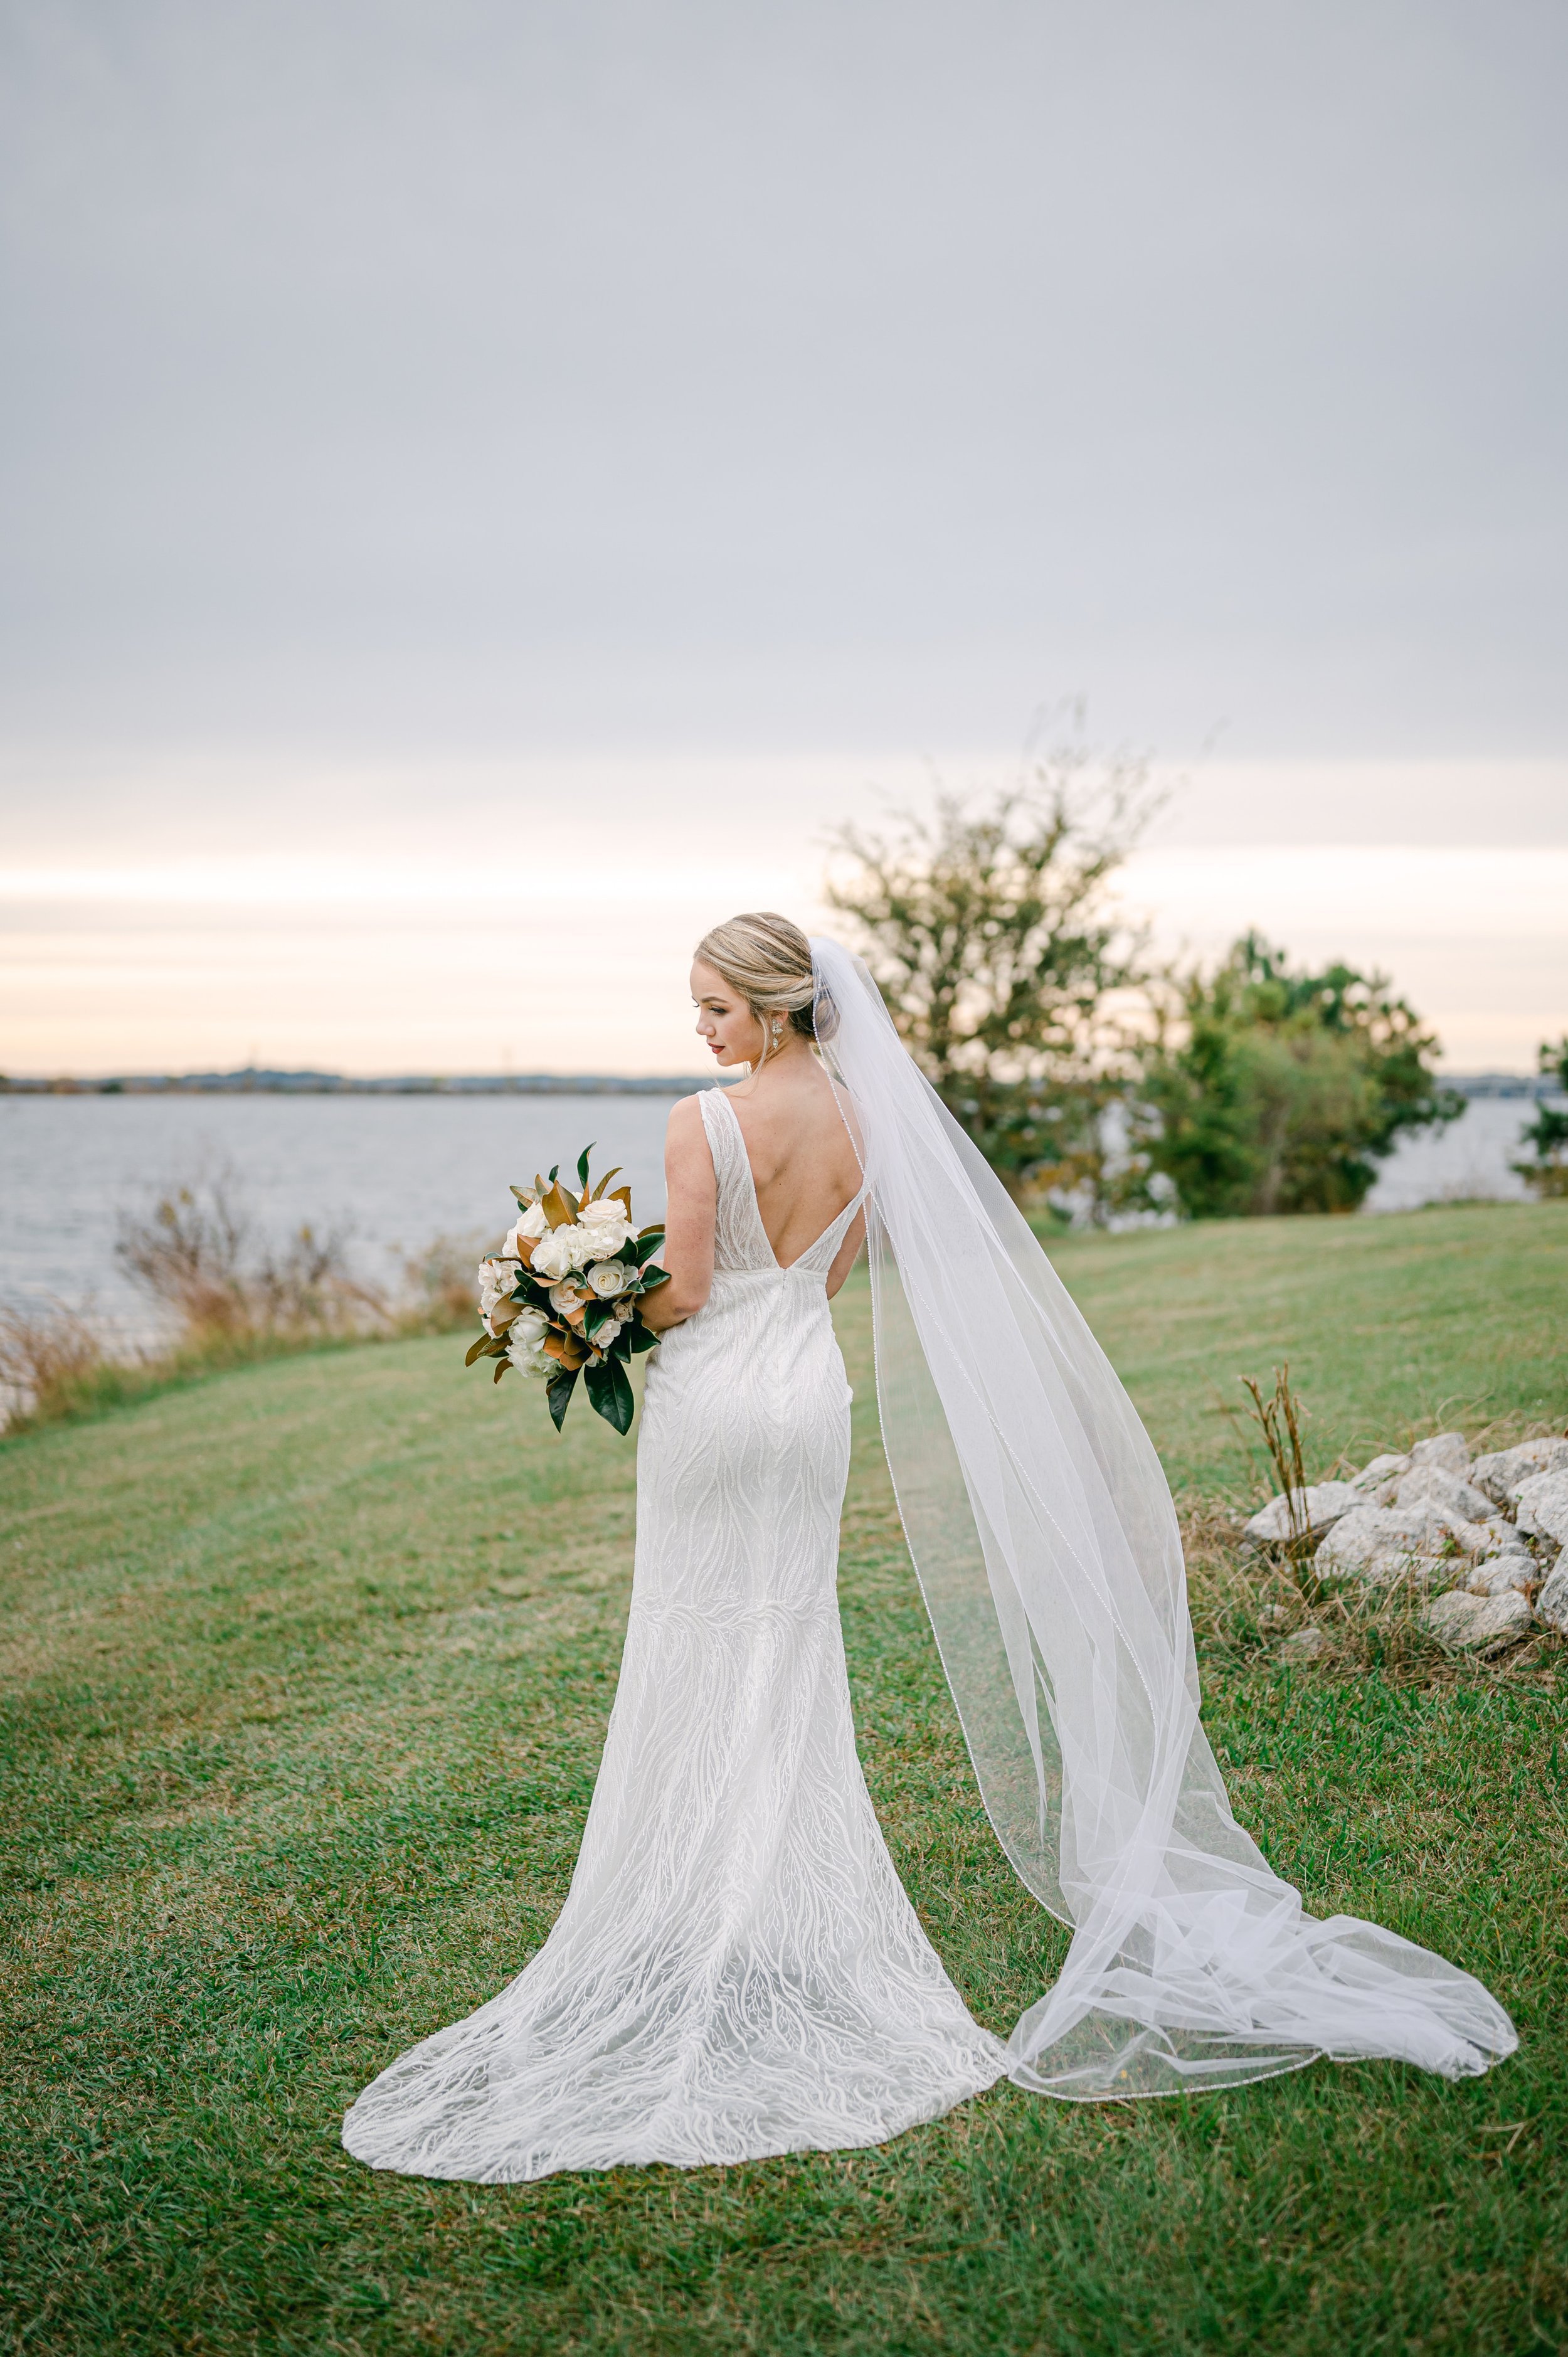 ivory-and-beau-bride-taylor-real-bride-ryder-made-with-love-wedding-dress-bridal-gown-wedding-gown-classic-bride-savannah-bridal-shop-bridal-boutique-bridal-shopping-bridal-style-bridal-inspo-2021-11-6 Taylor-and-Ben-Augusta-Wedding-Photographer164.jpg